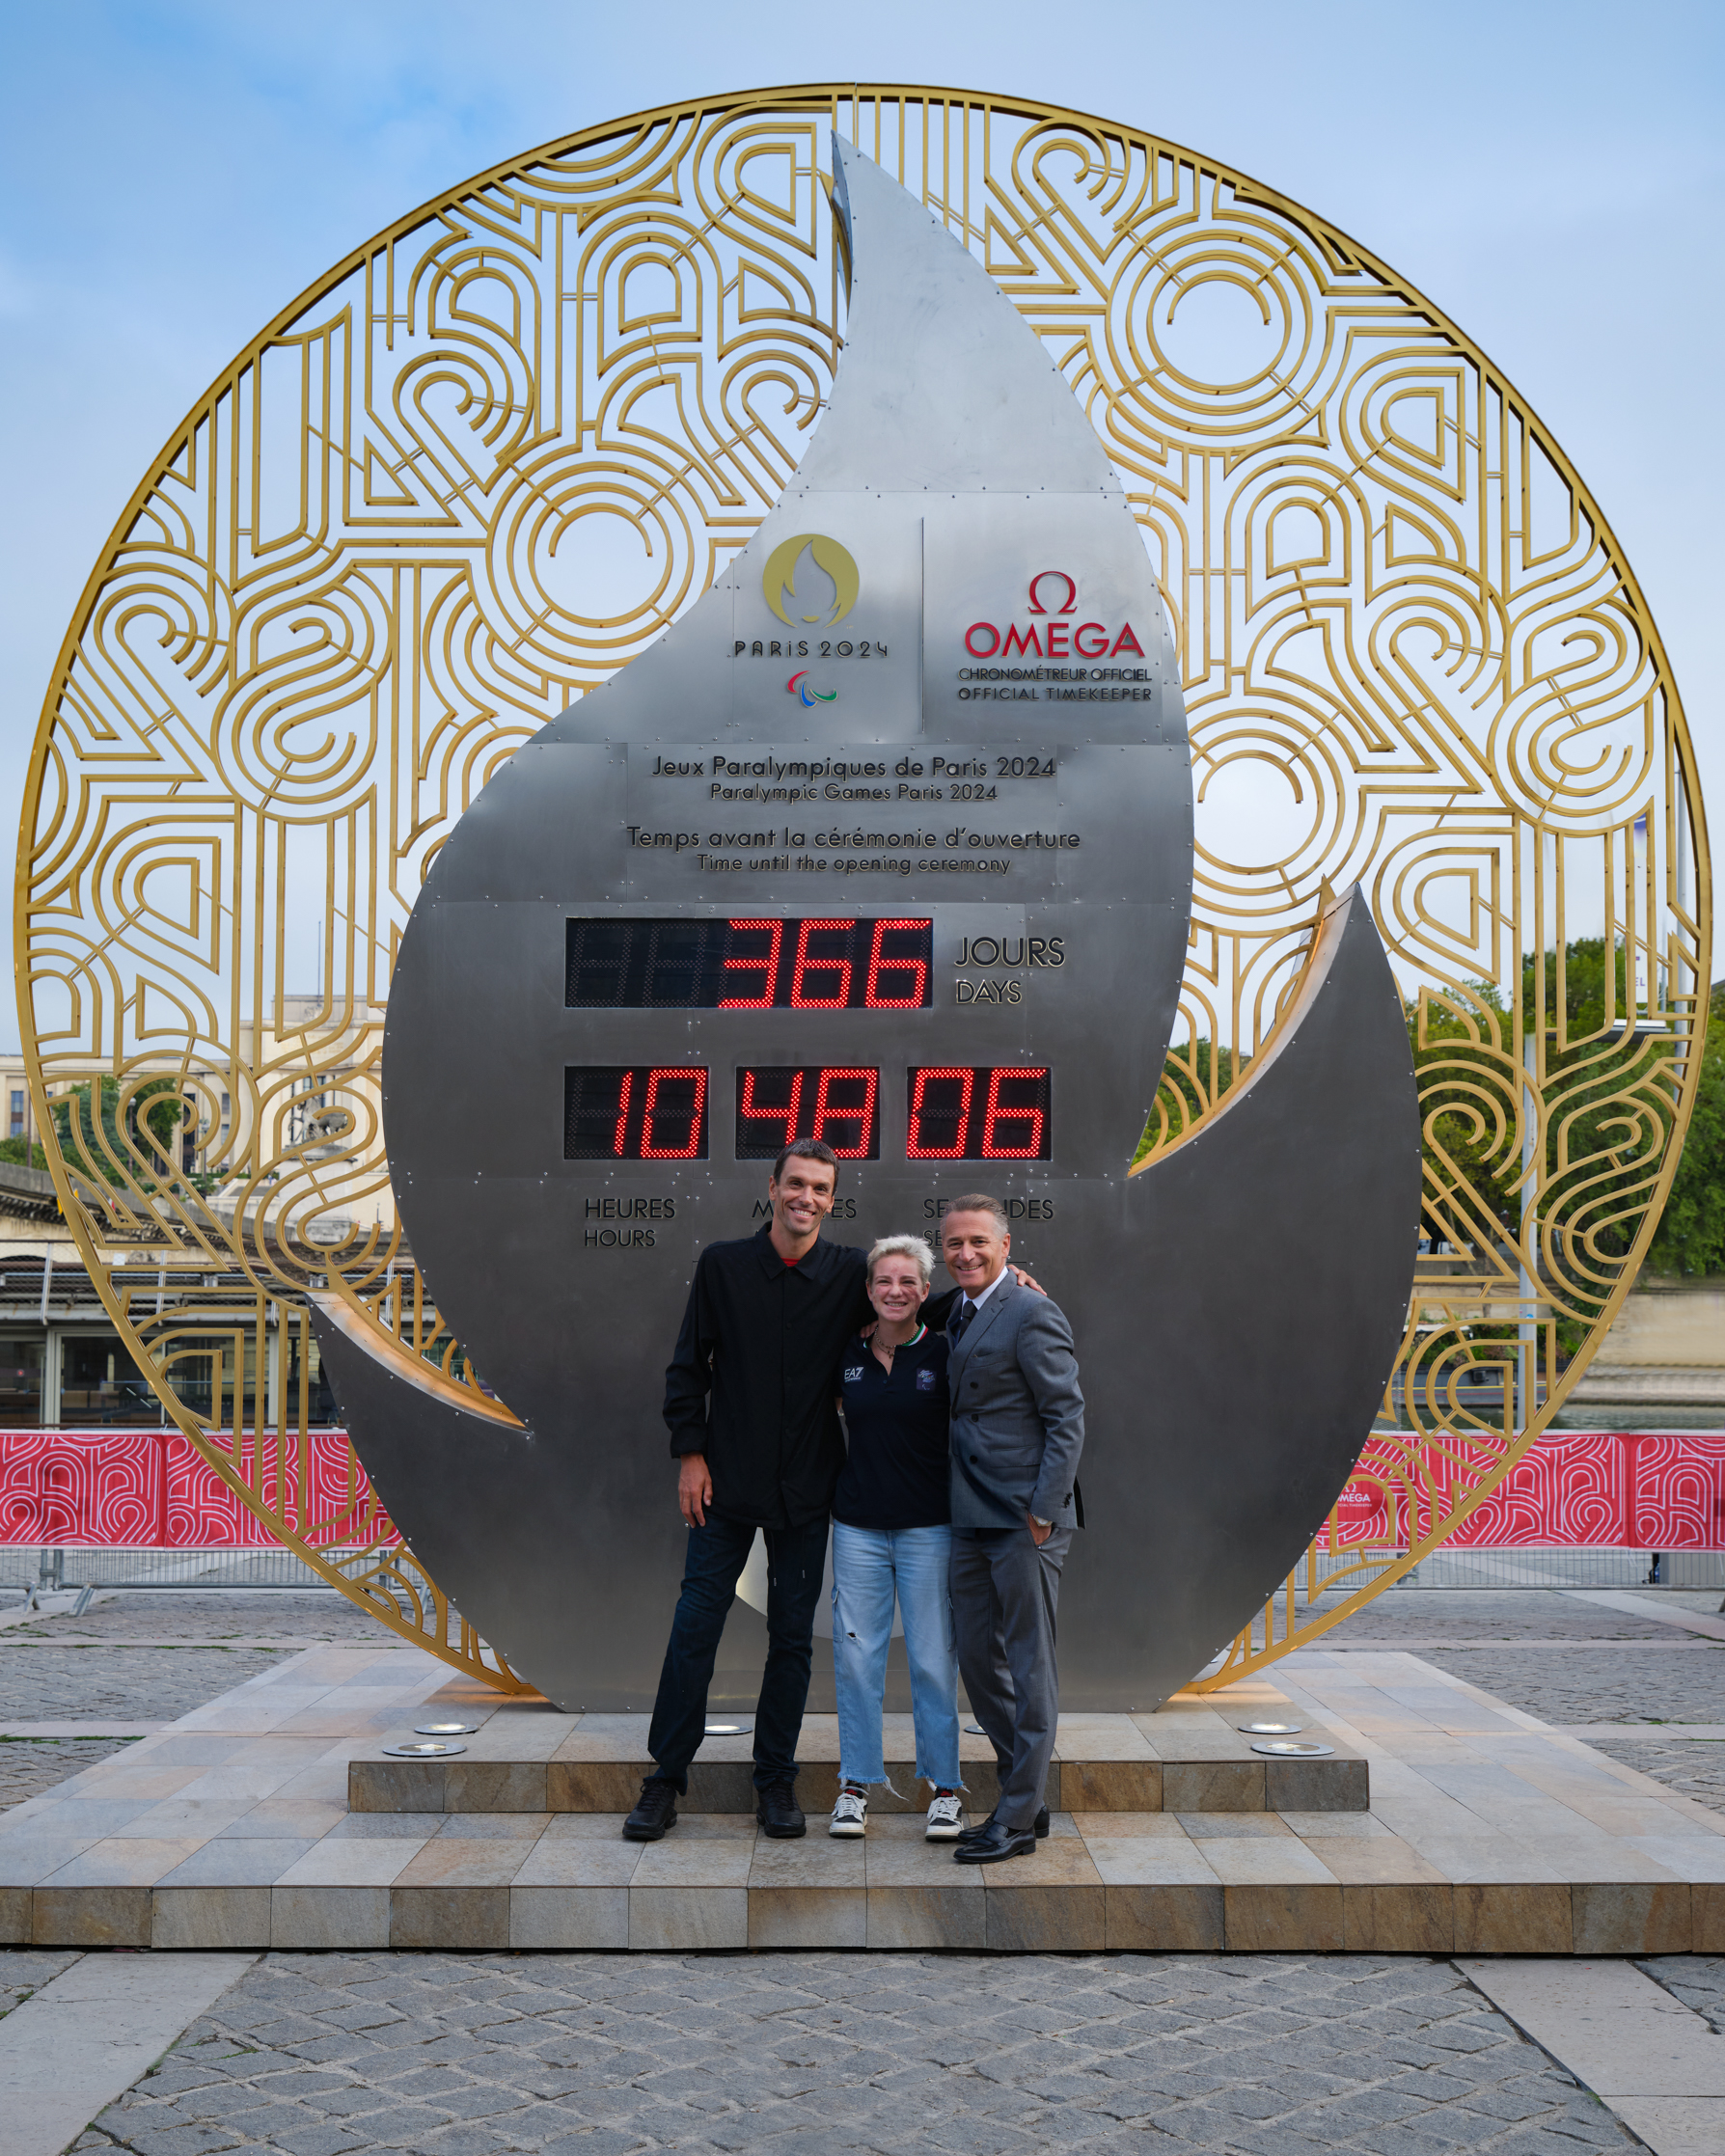   Two New Ambassadors Join OMEGA For The Countdown to the Paralympic Games Paris 2024